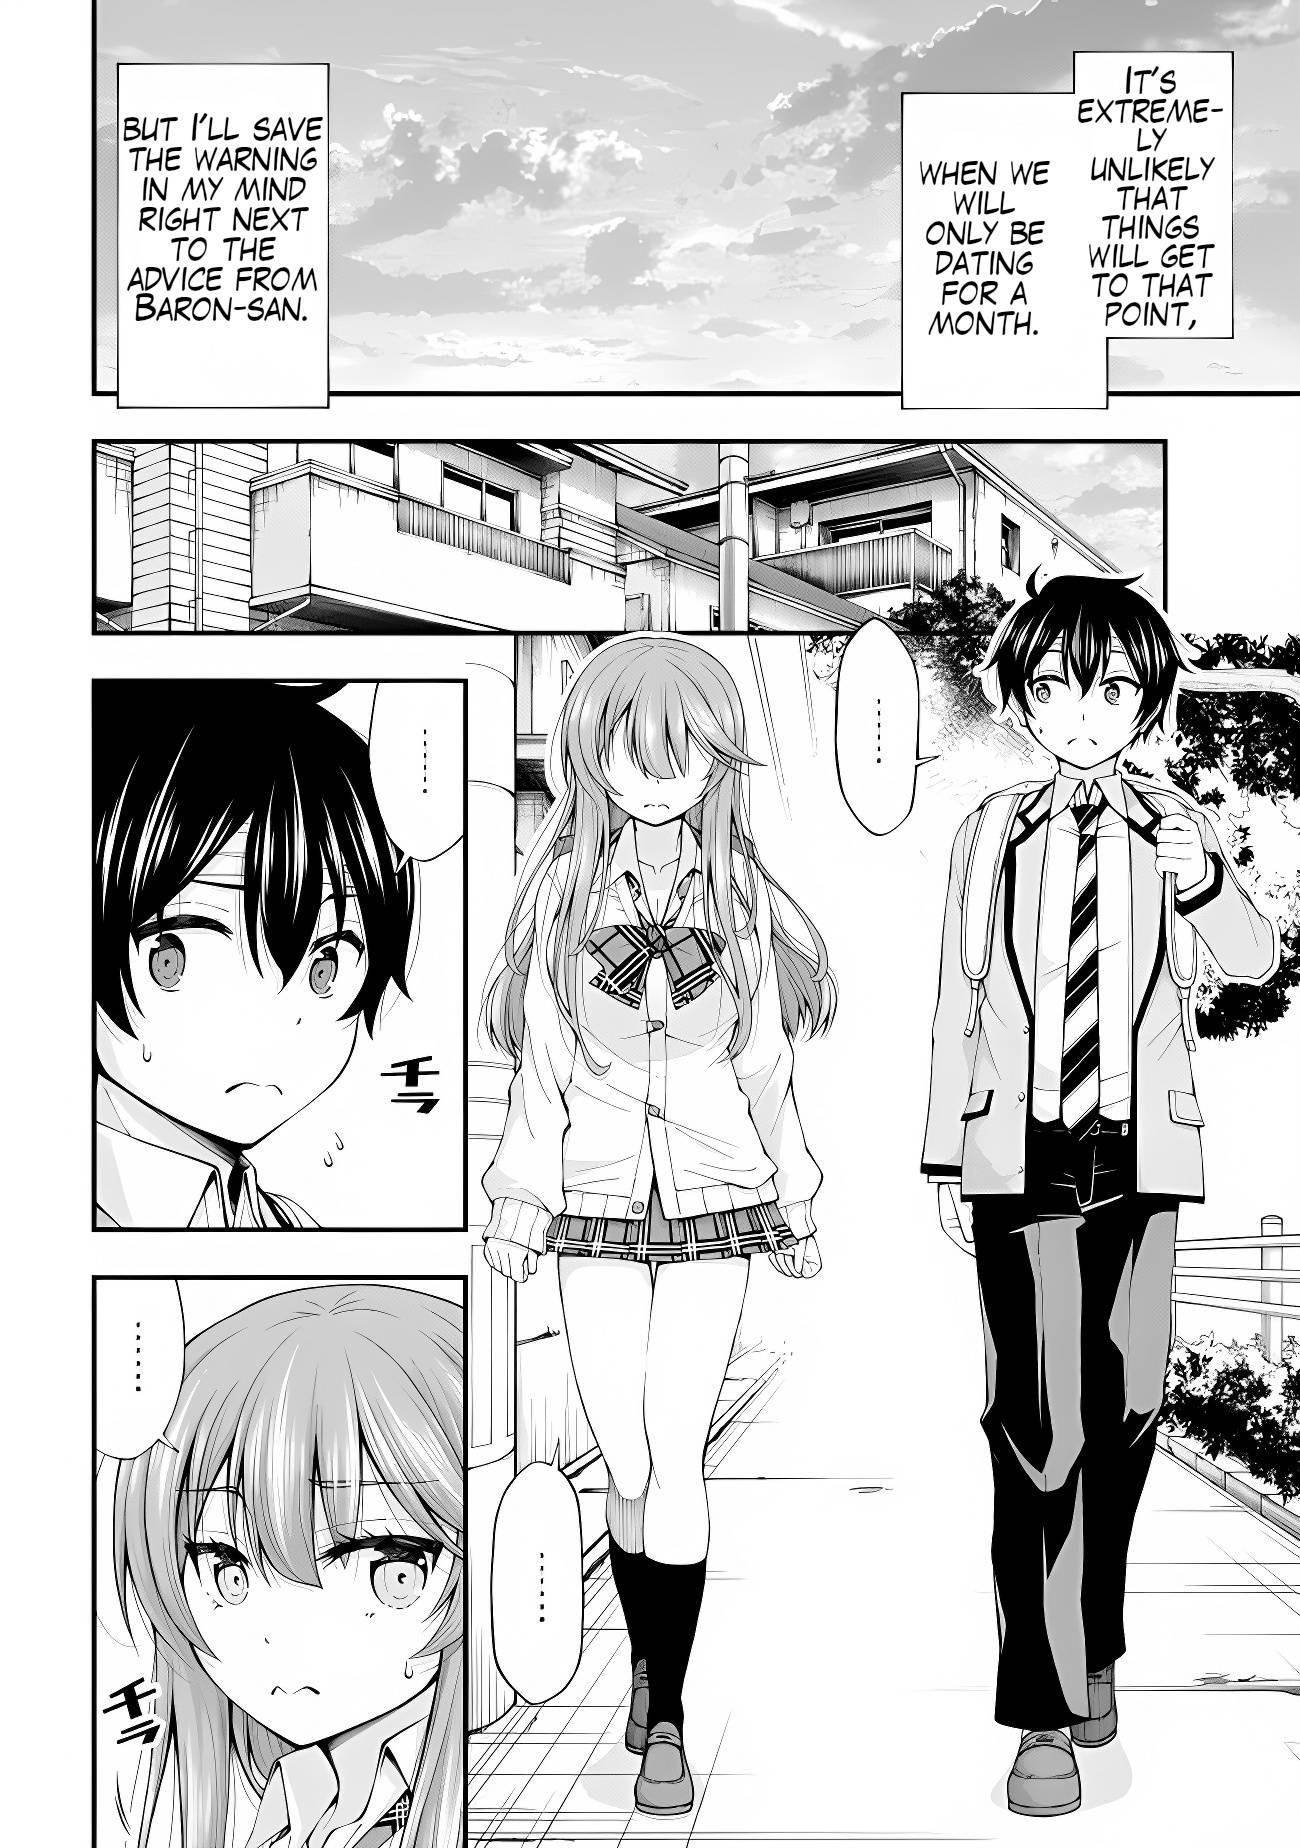 The Gal Who Was Meant to Confess to Me as a Game Punishment Has Apparently Fallen in Love with Me - chapter 2 - #4